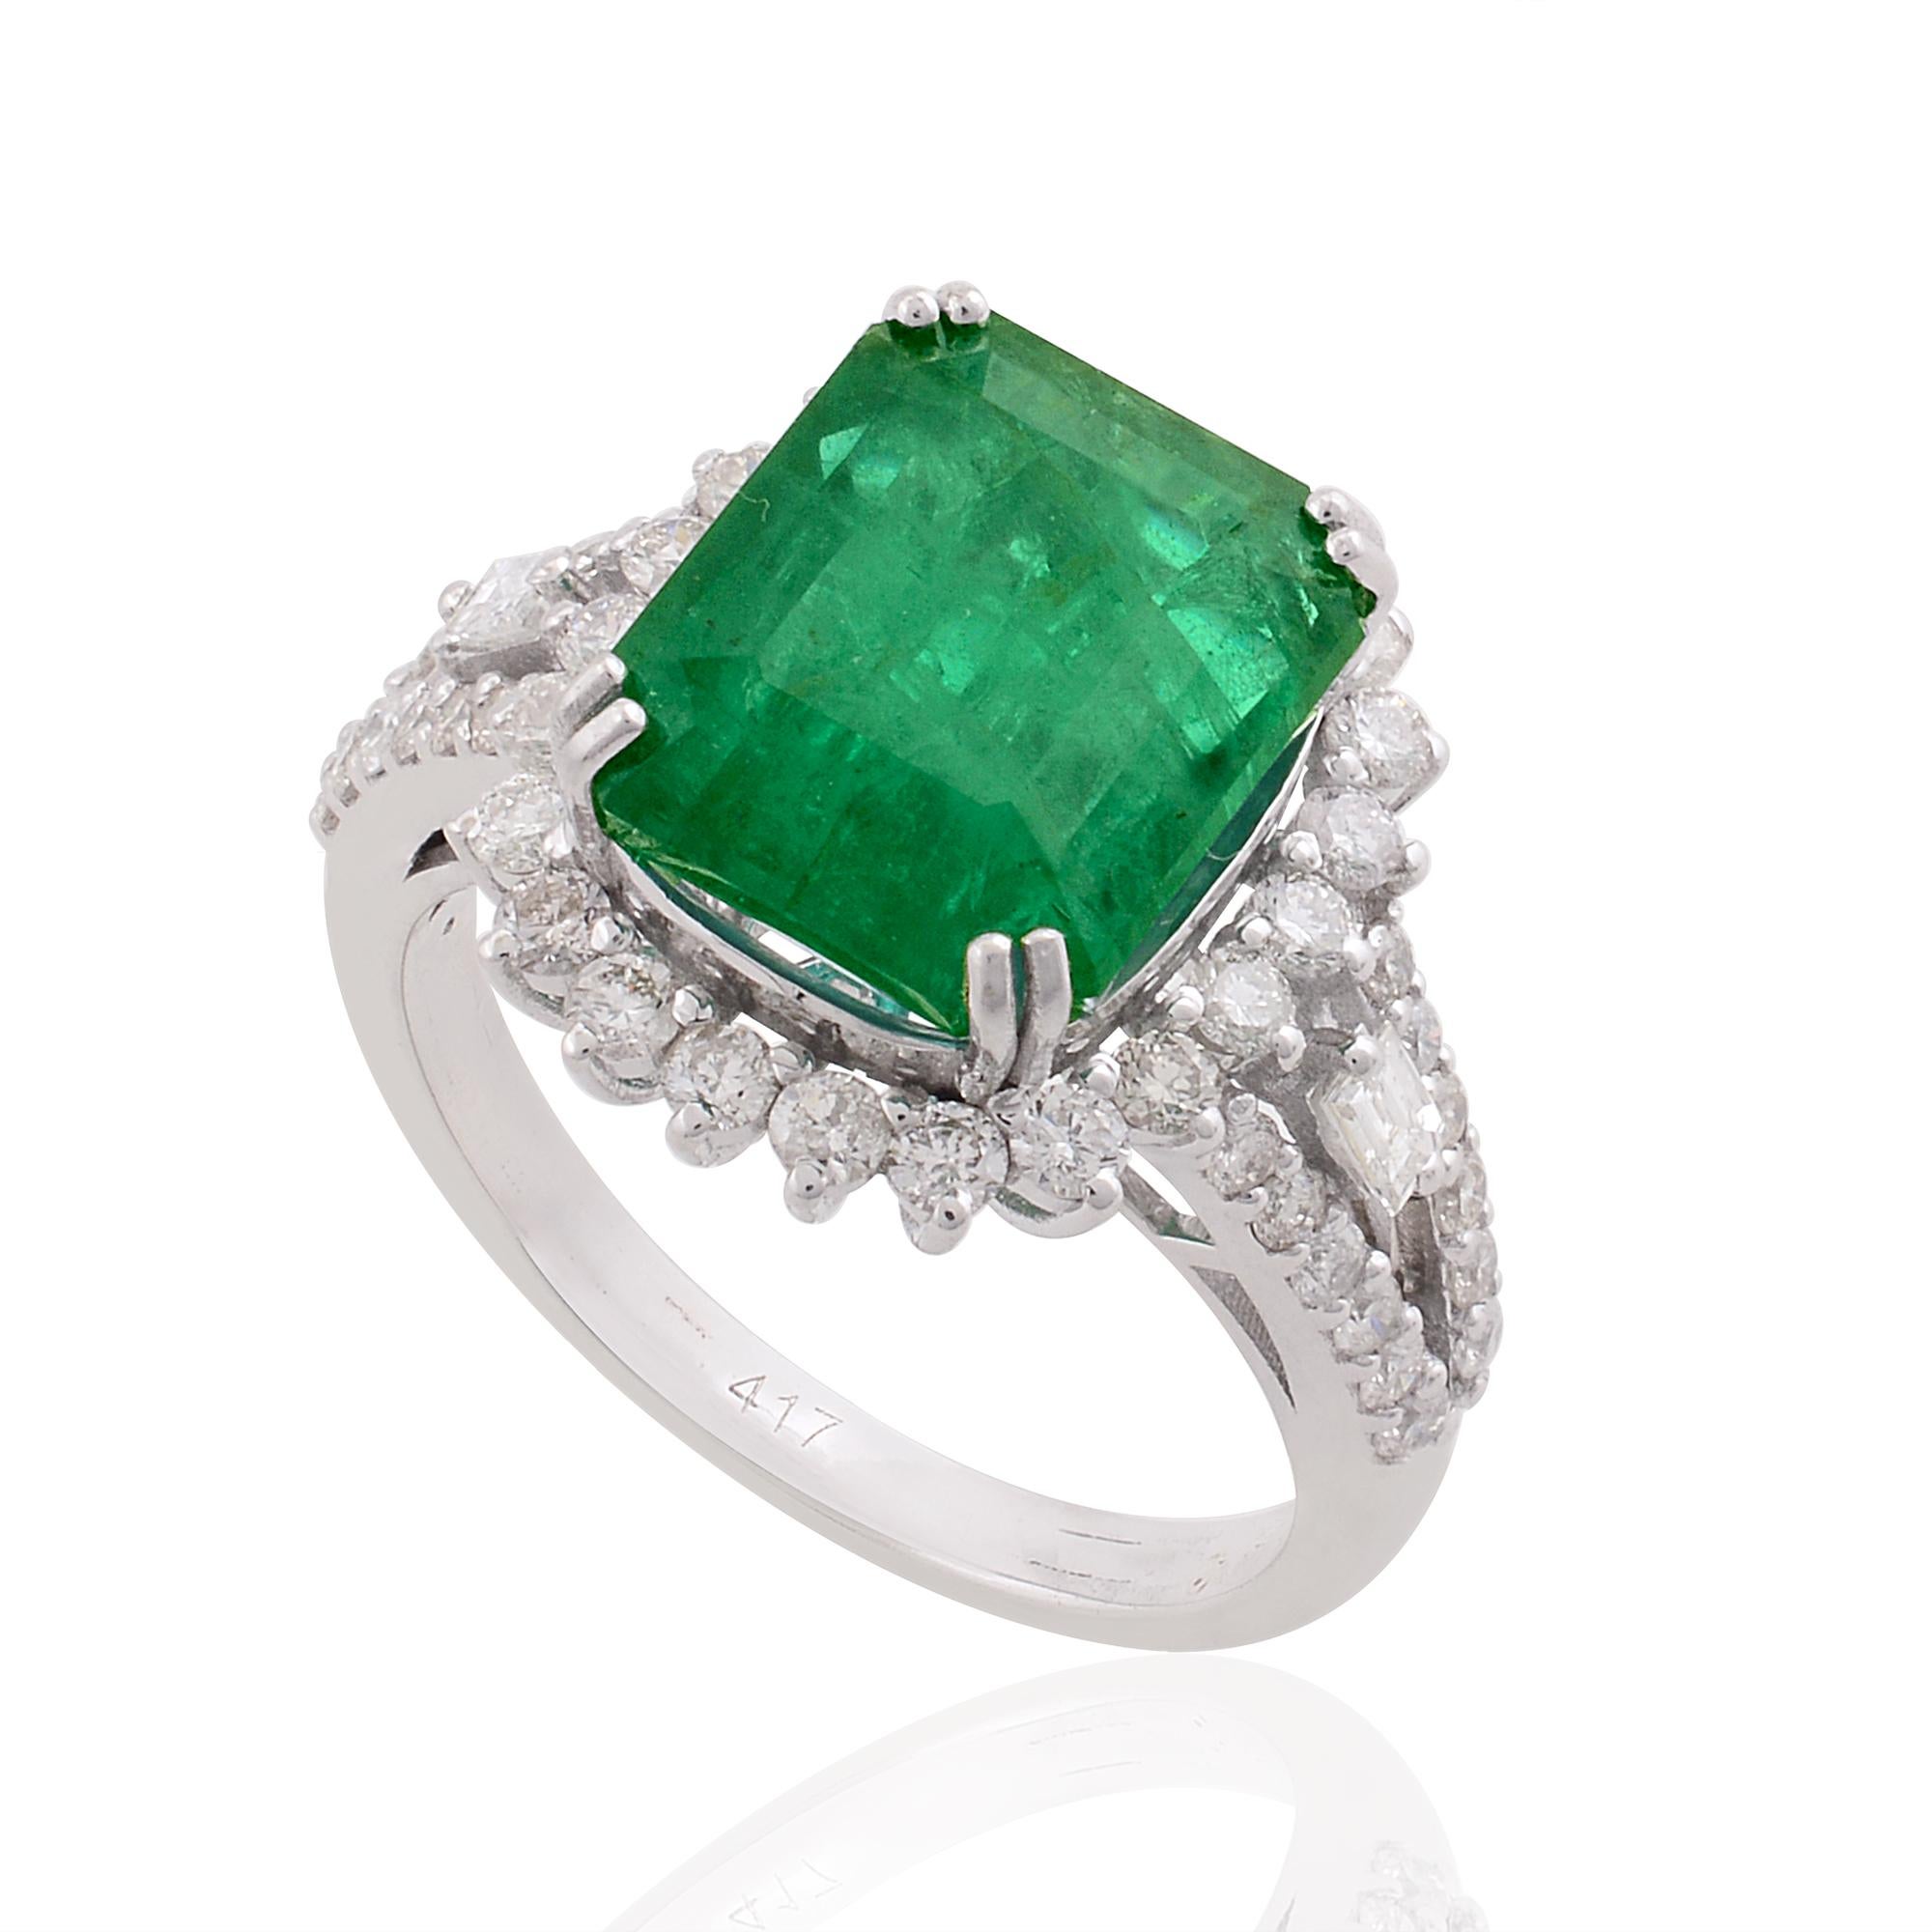 Oval Cut Natural Emerald Gemstone Cocktail Ring Diamond 10 Karat White Gold Fine Jewelry For Sale